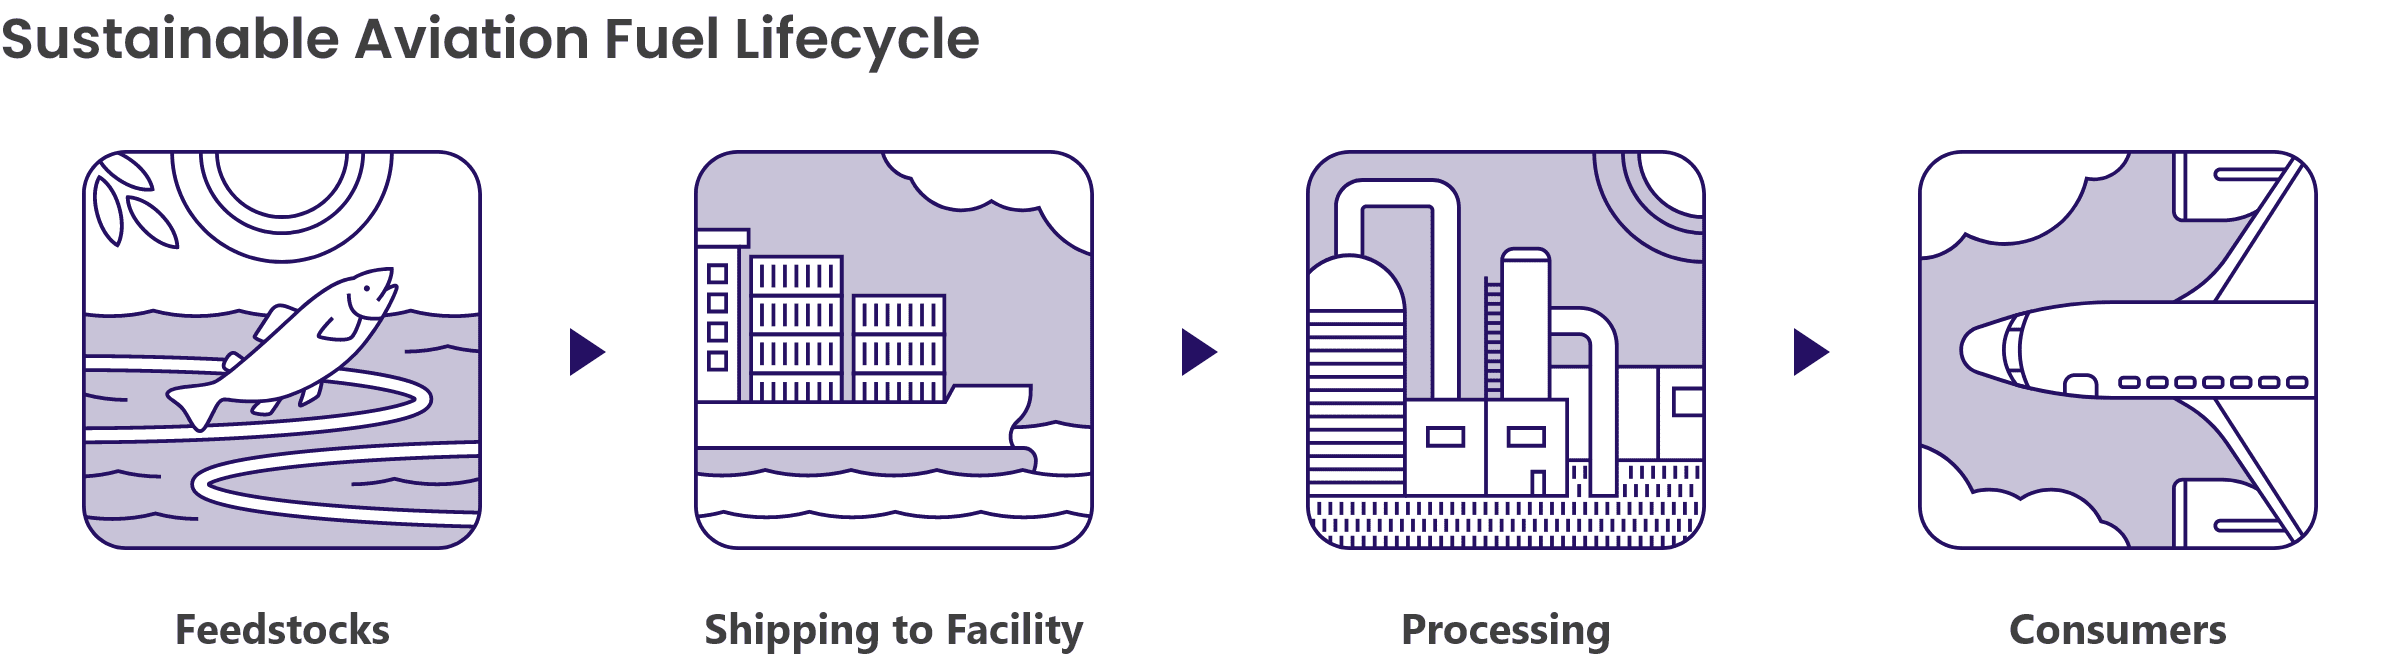 LIFECYCLE121 - Sustainable Aviation Fuel